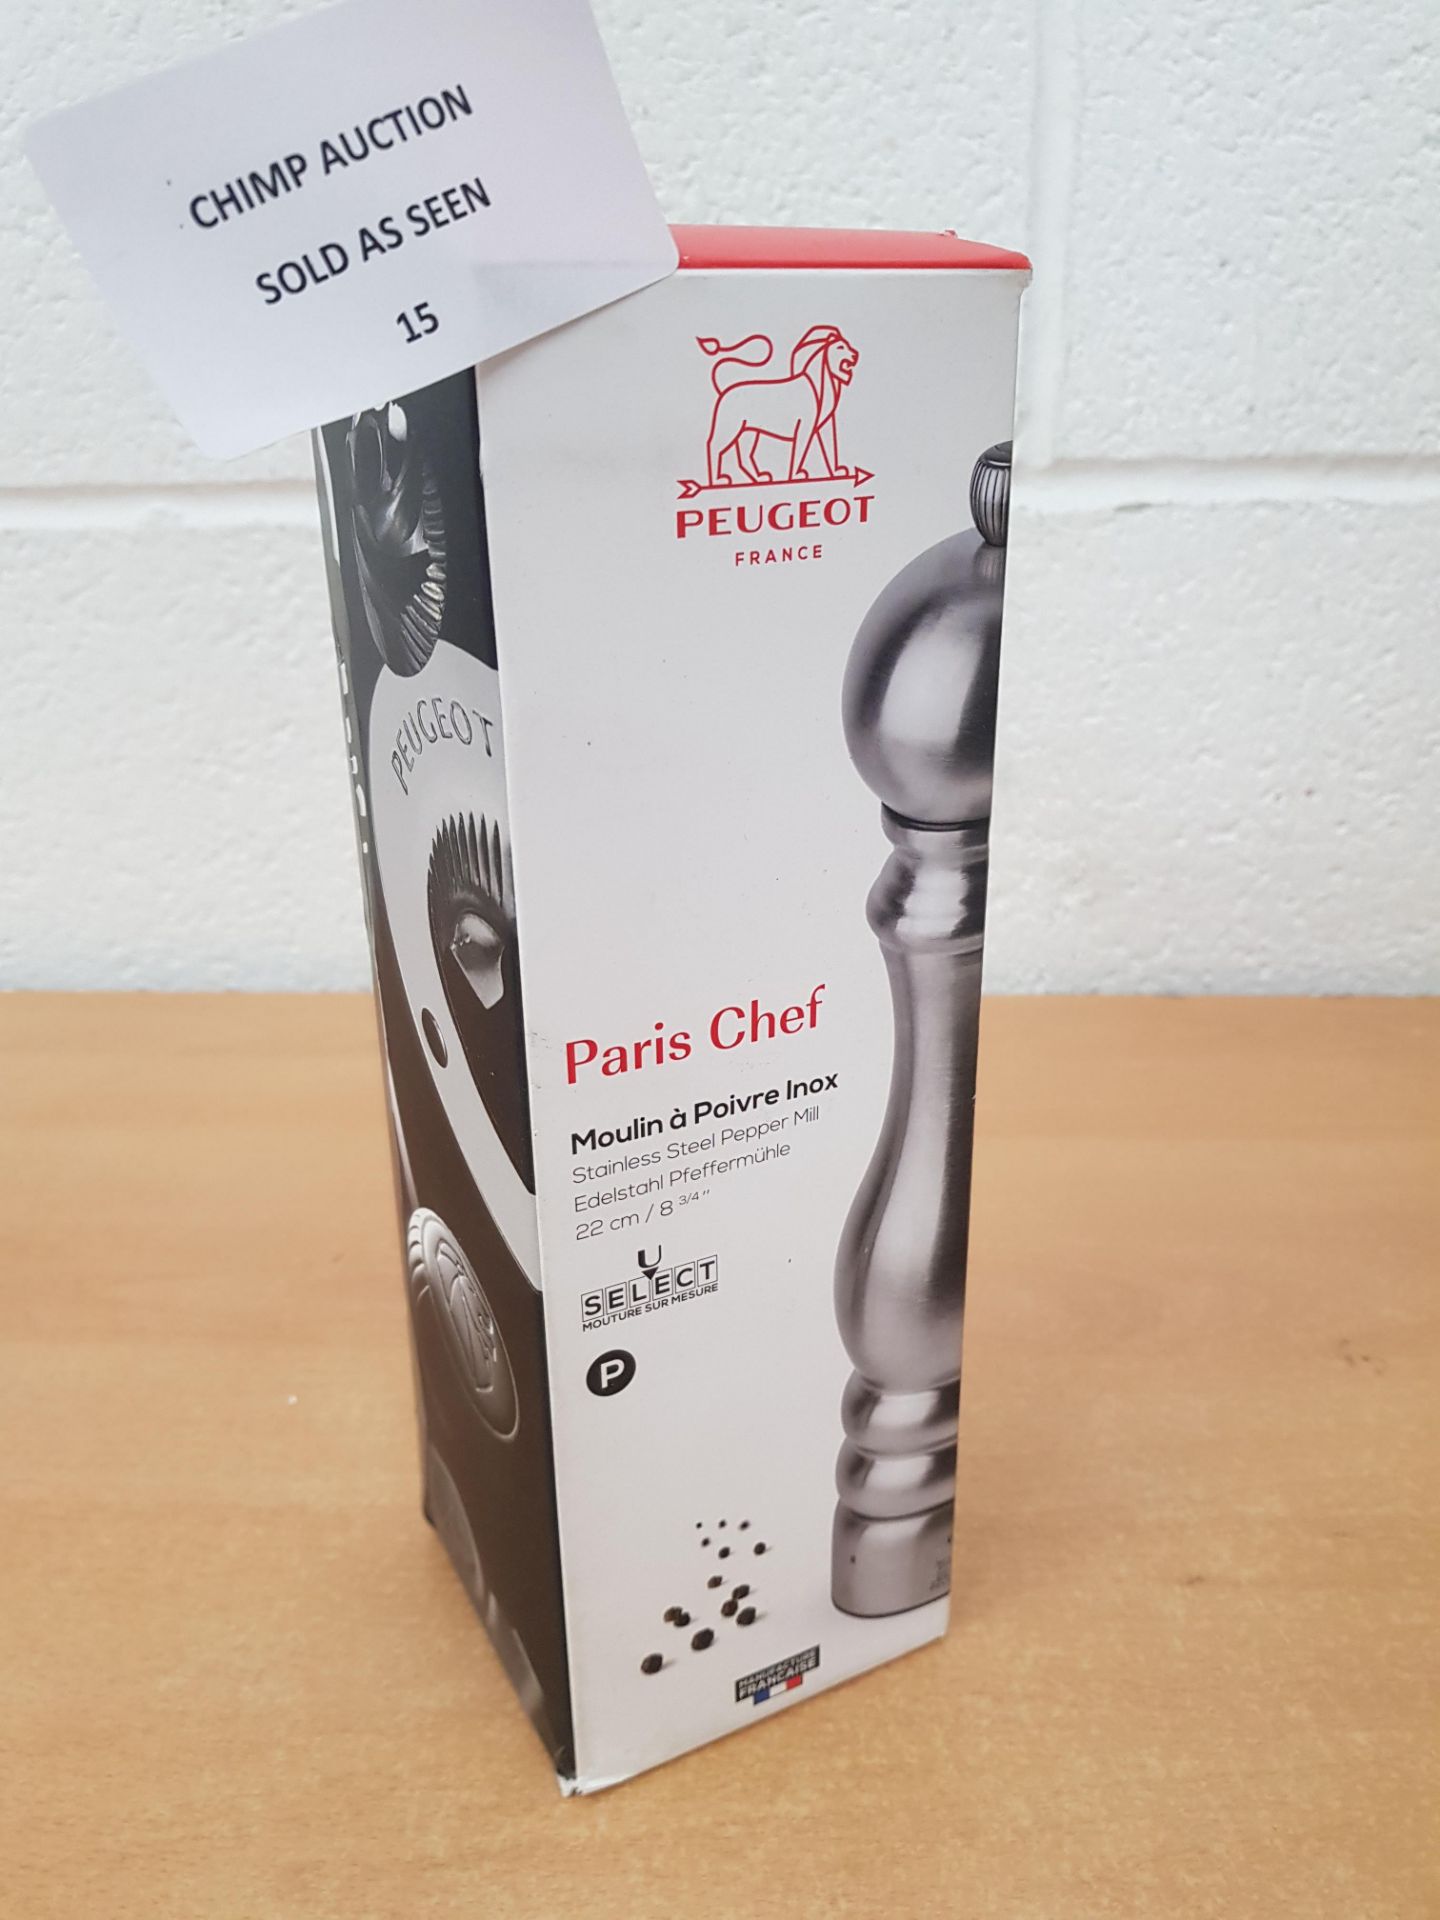 Peugeot Paris Chef Stainless Steel Pepper Mill